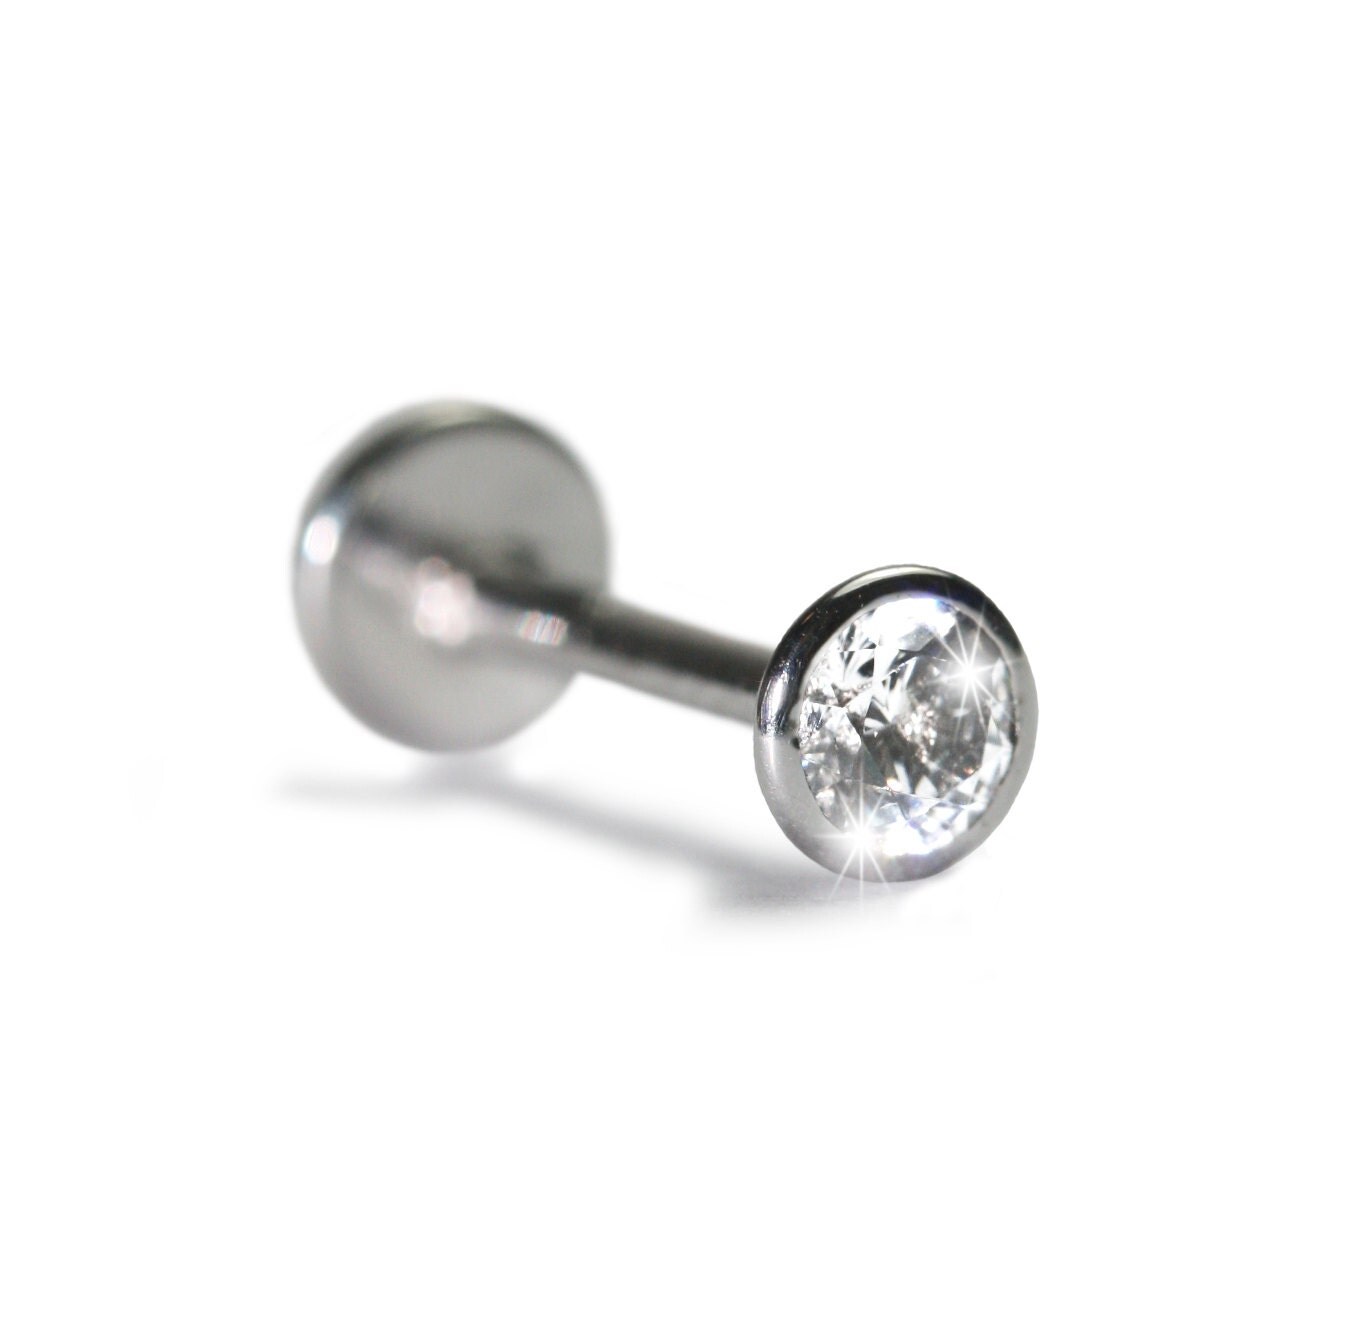 Internally Threaded Tube Labret Stud With 6pt 26mm Diamond truly Incredible and Interesting labret jewelry for Present House